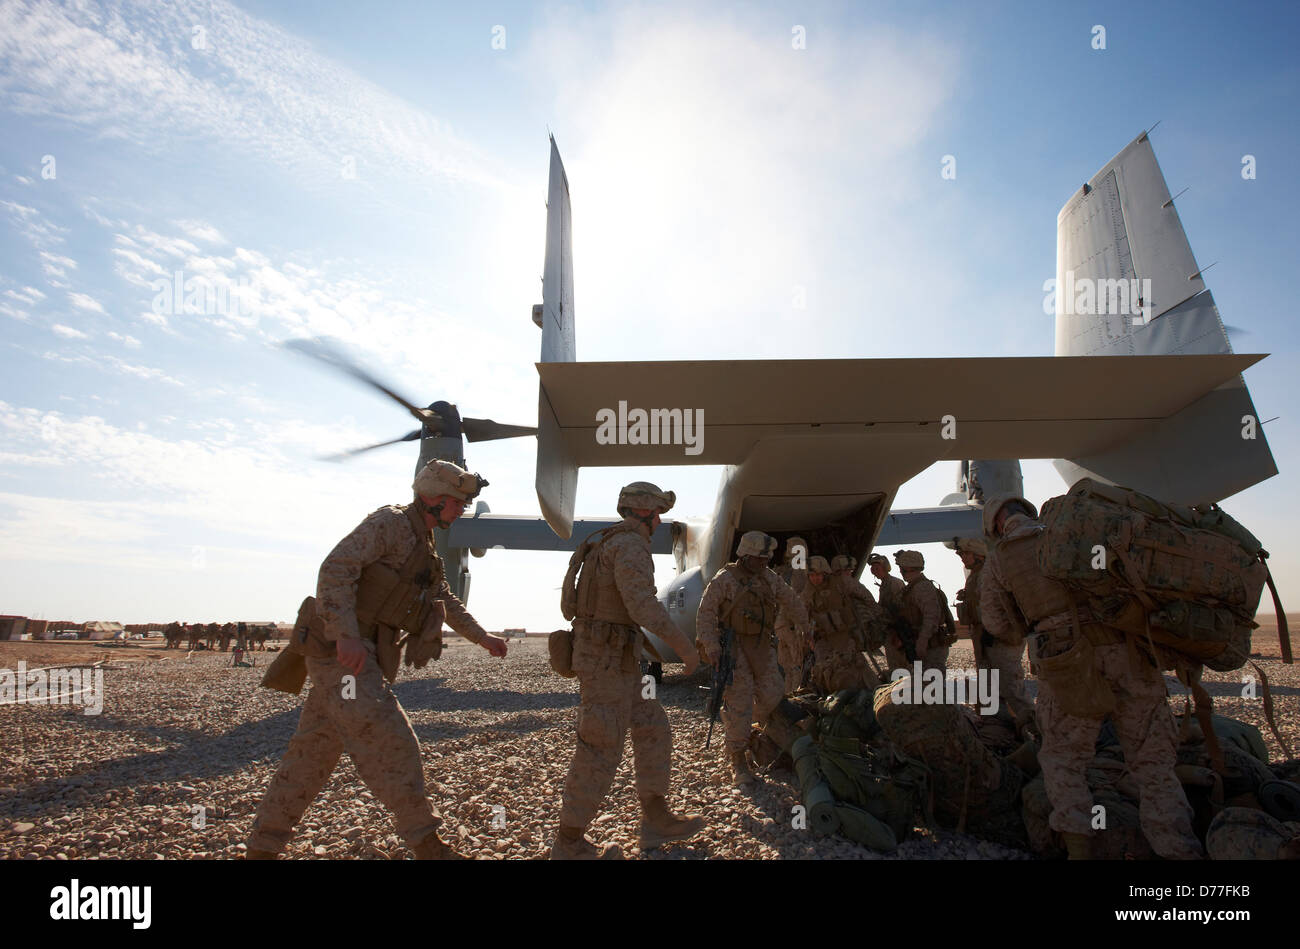 United States Marines load into MV-22 Osprey at remote austere combat outpost in Helmand Province Afghanistan Stock Photo